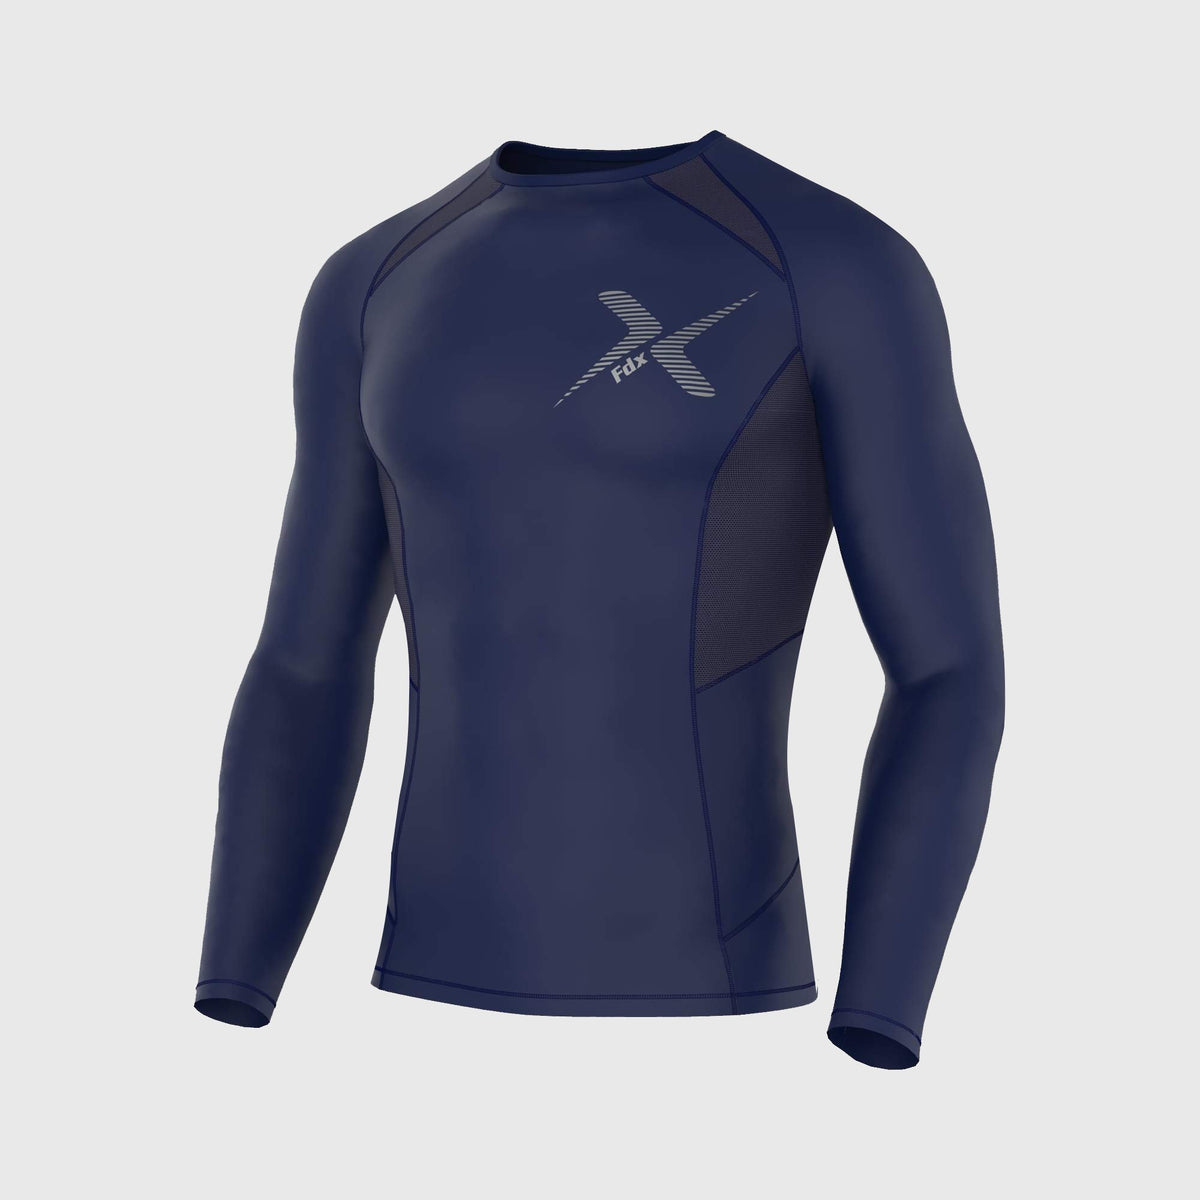 Men's Compression Long Sleeve Workout Shirt, Fitness Base Layer